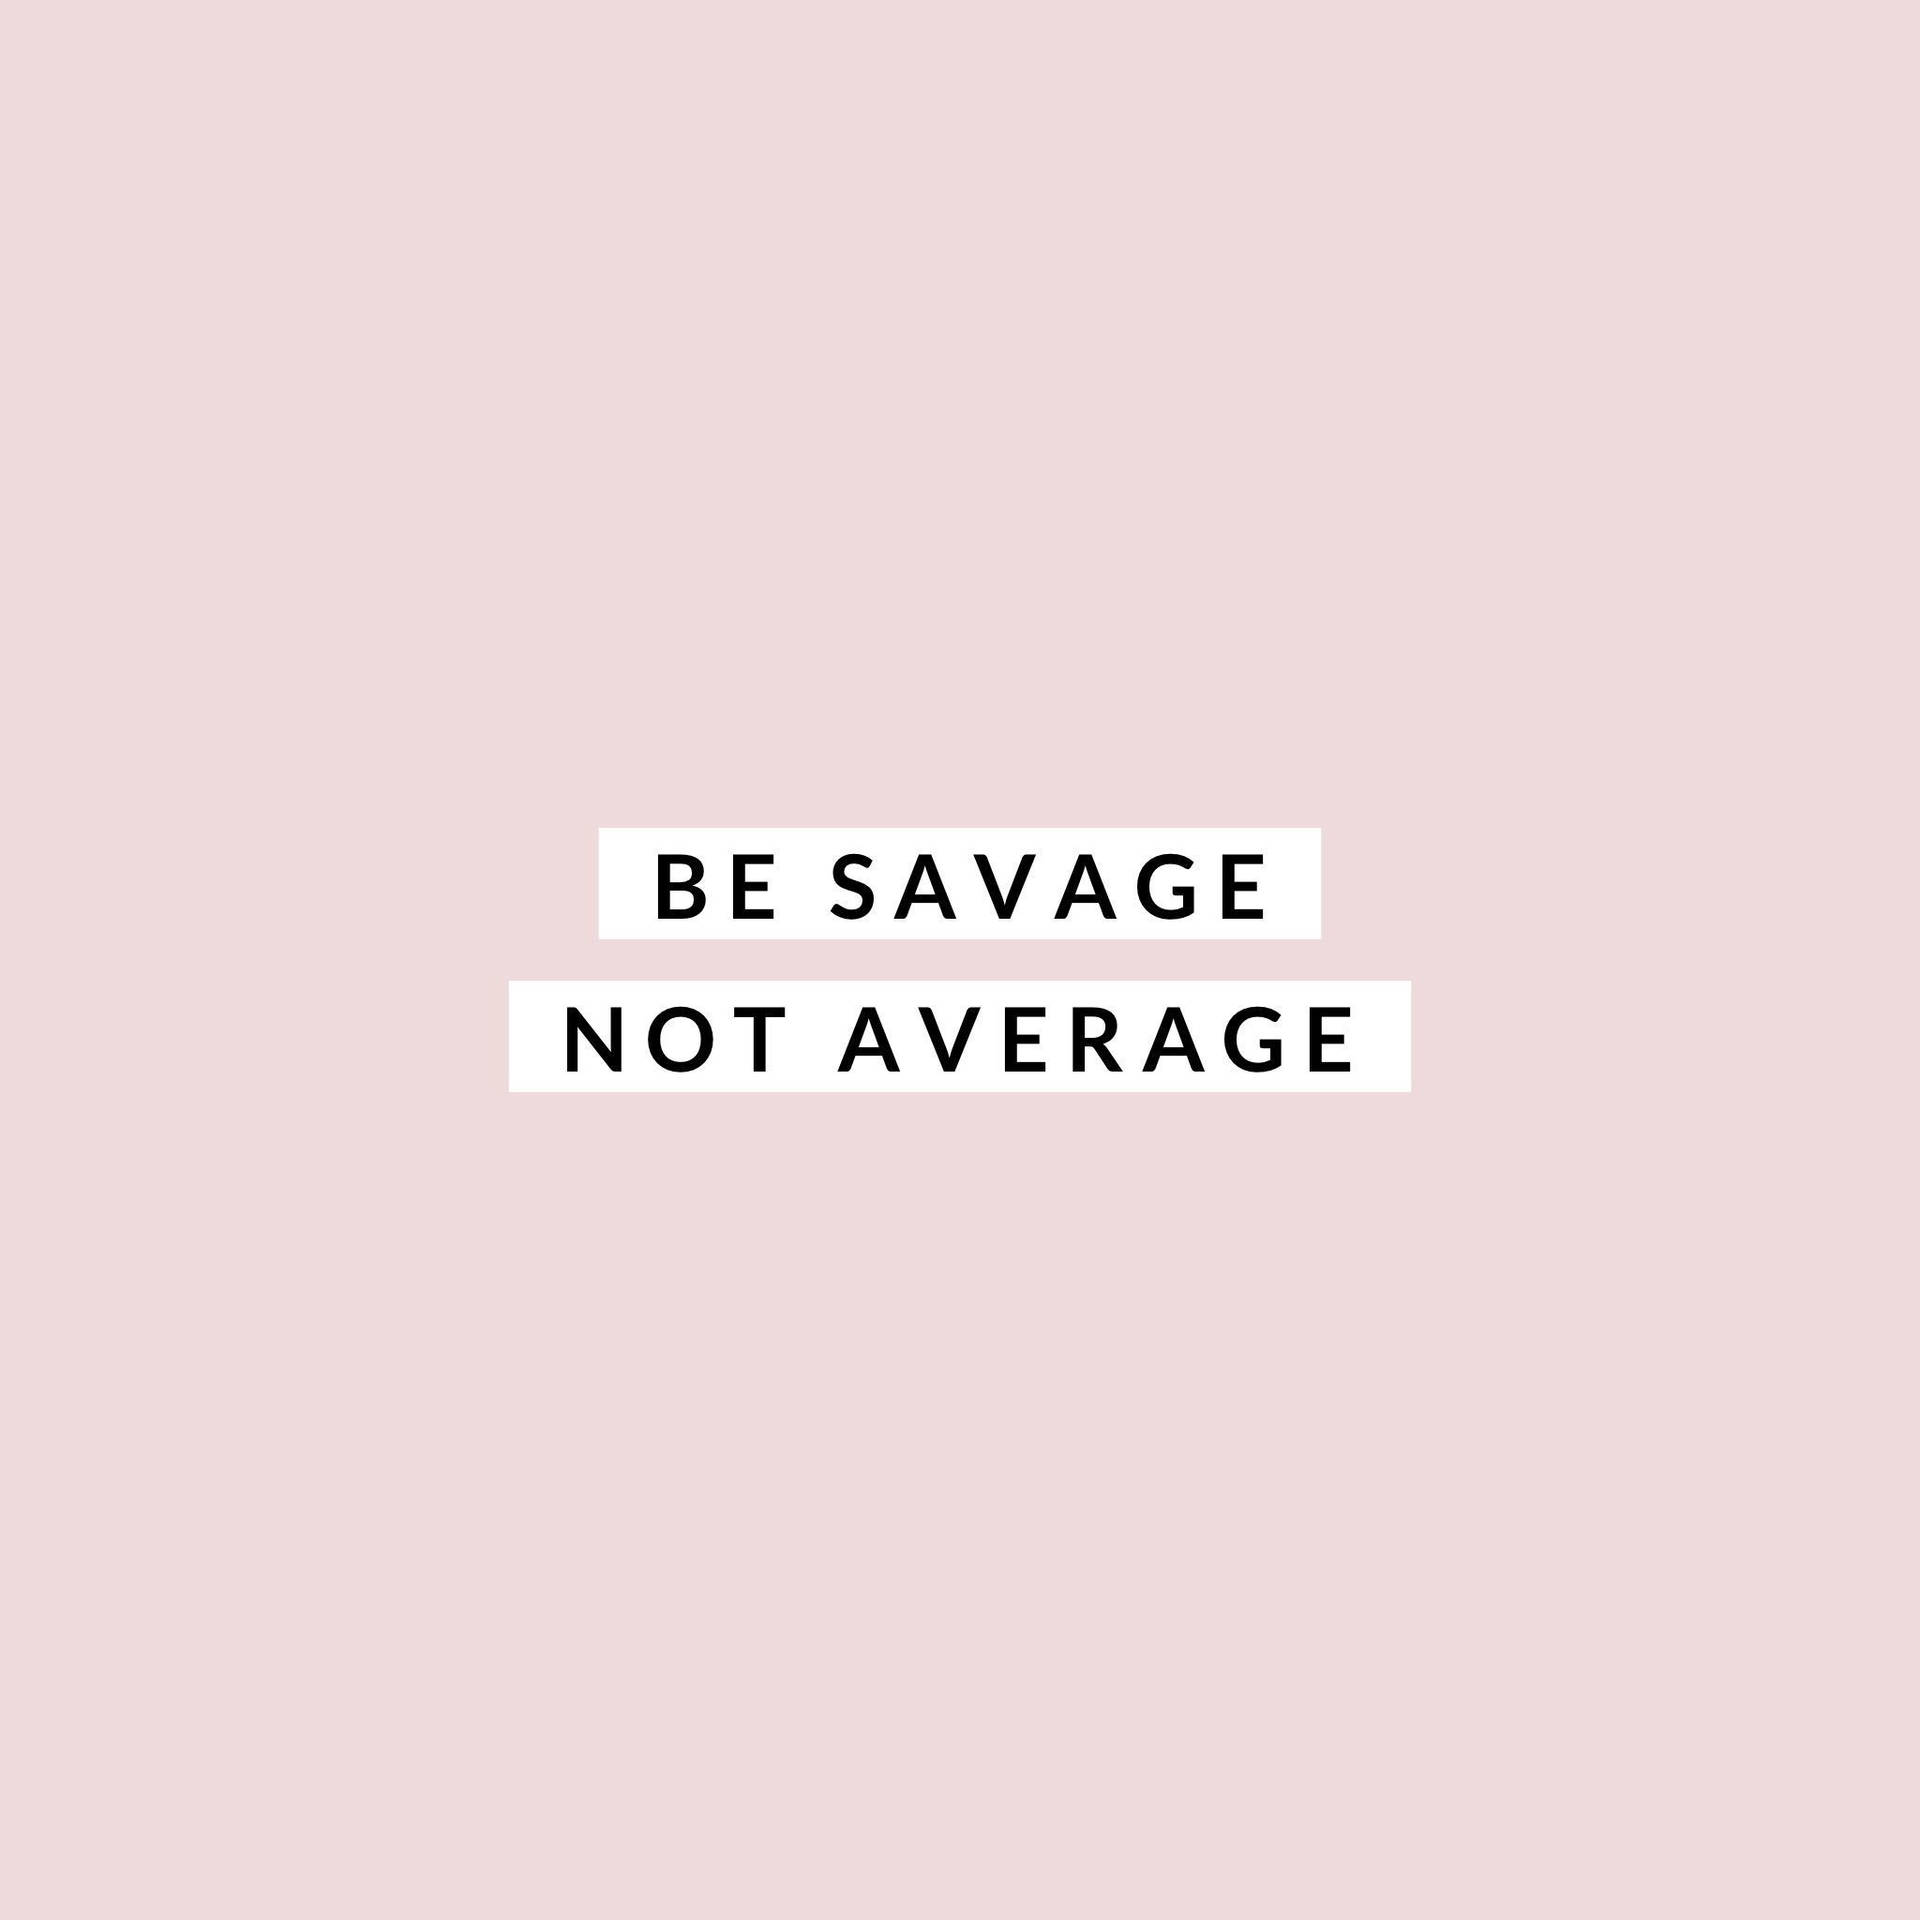 Download Savage Quote In Pink Wallpaper